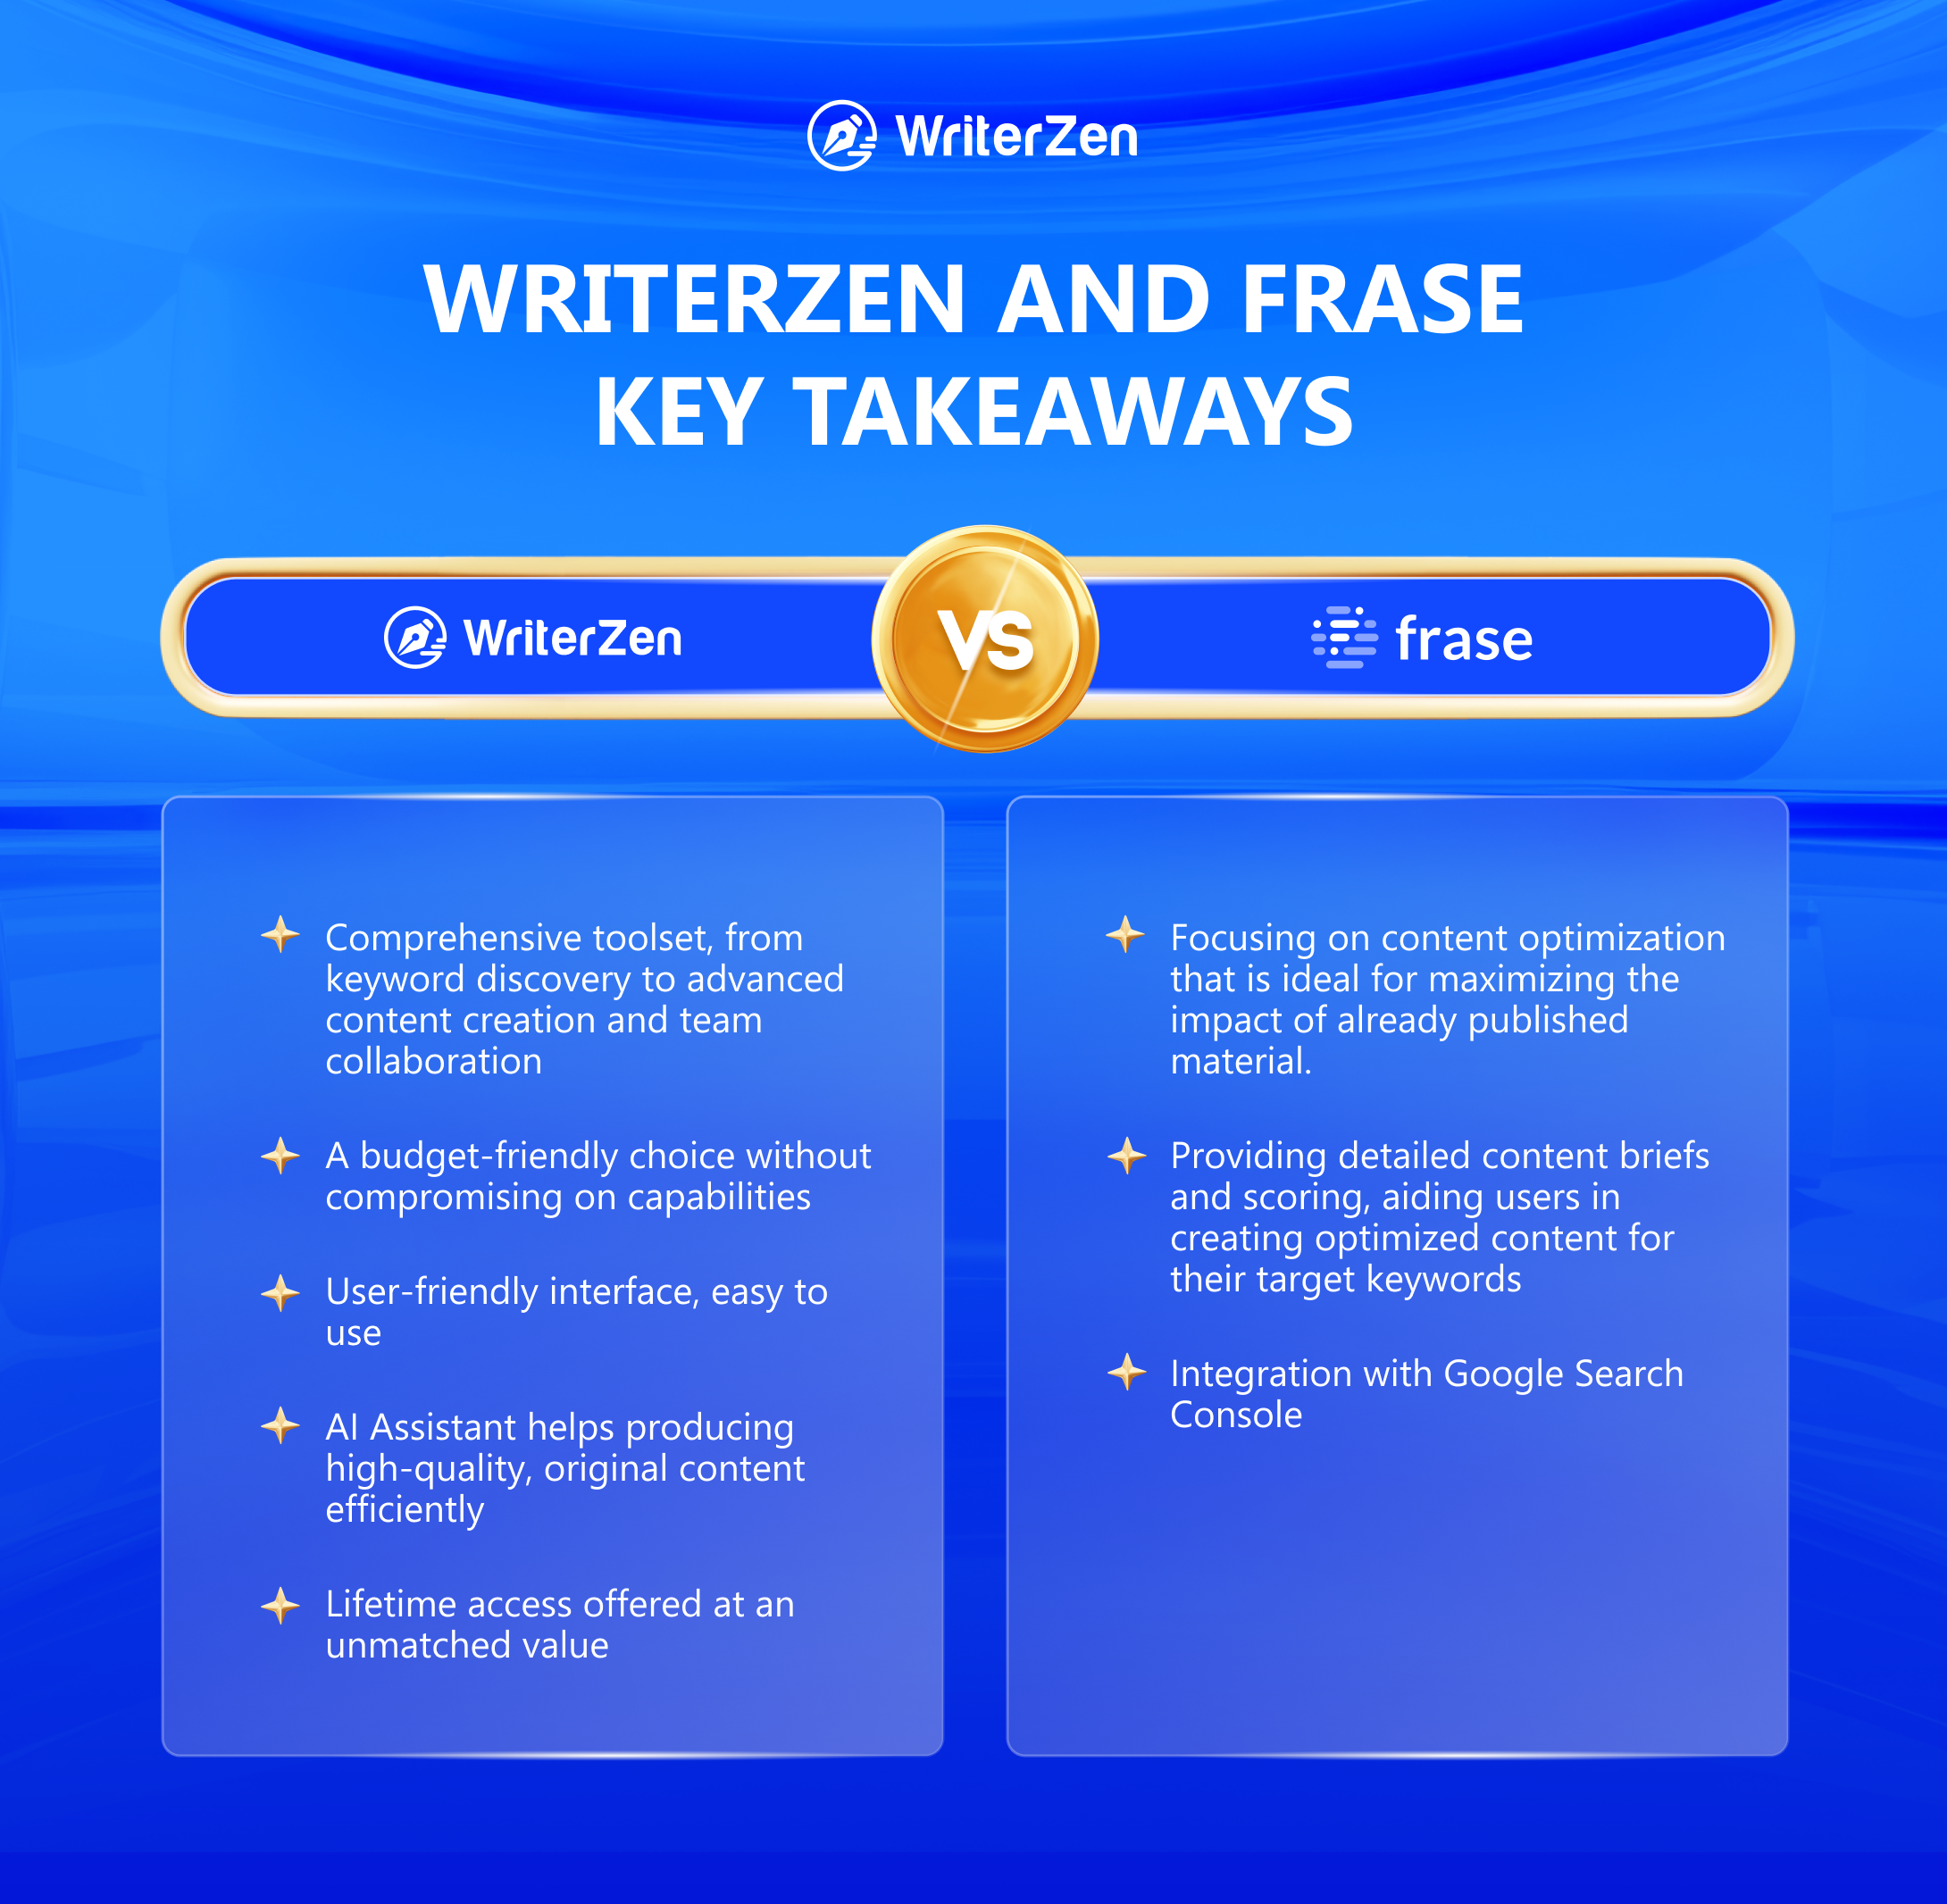 Key Differences between WriterZen and Frase